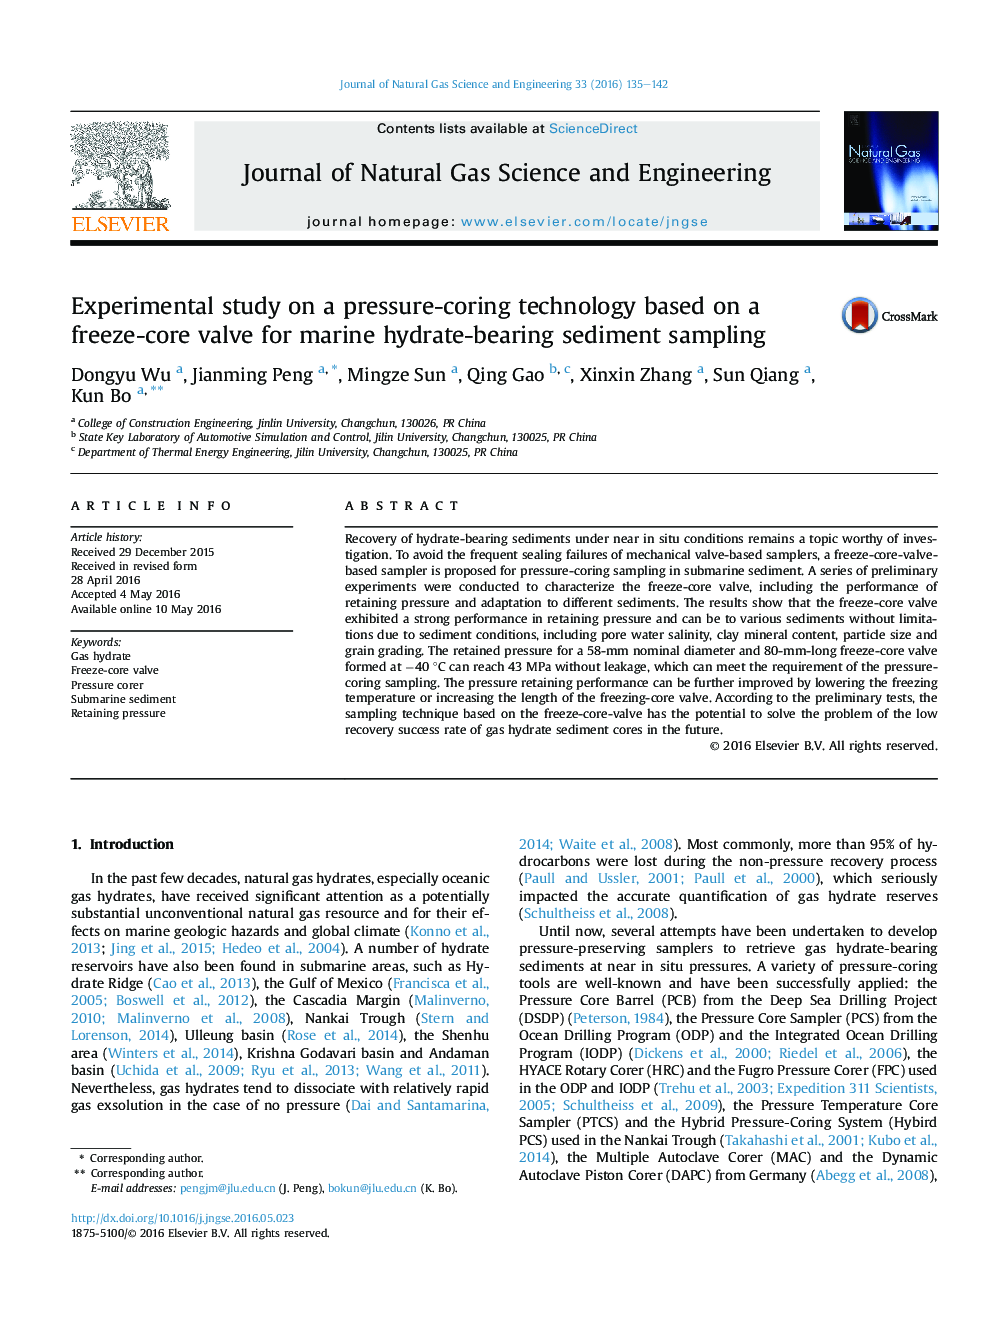 Experimental study on a pressure-coring technology based on a freeze-core valve for marine hydrate-bearing sediment sampling